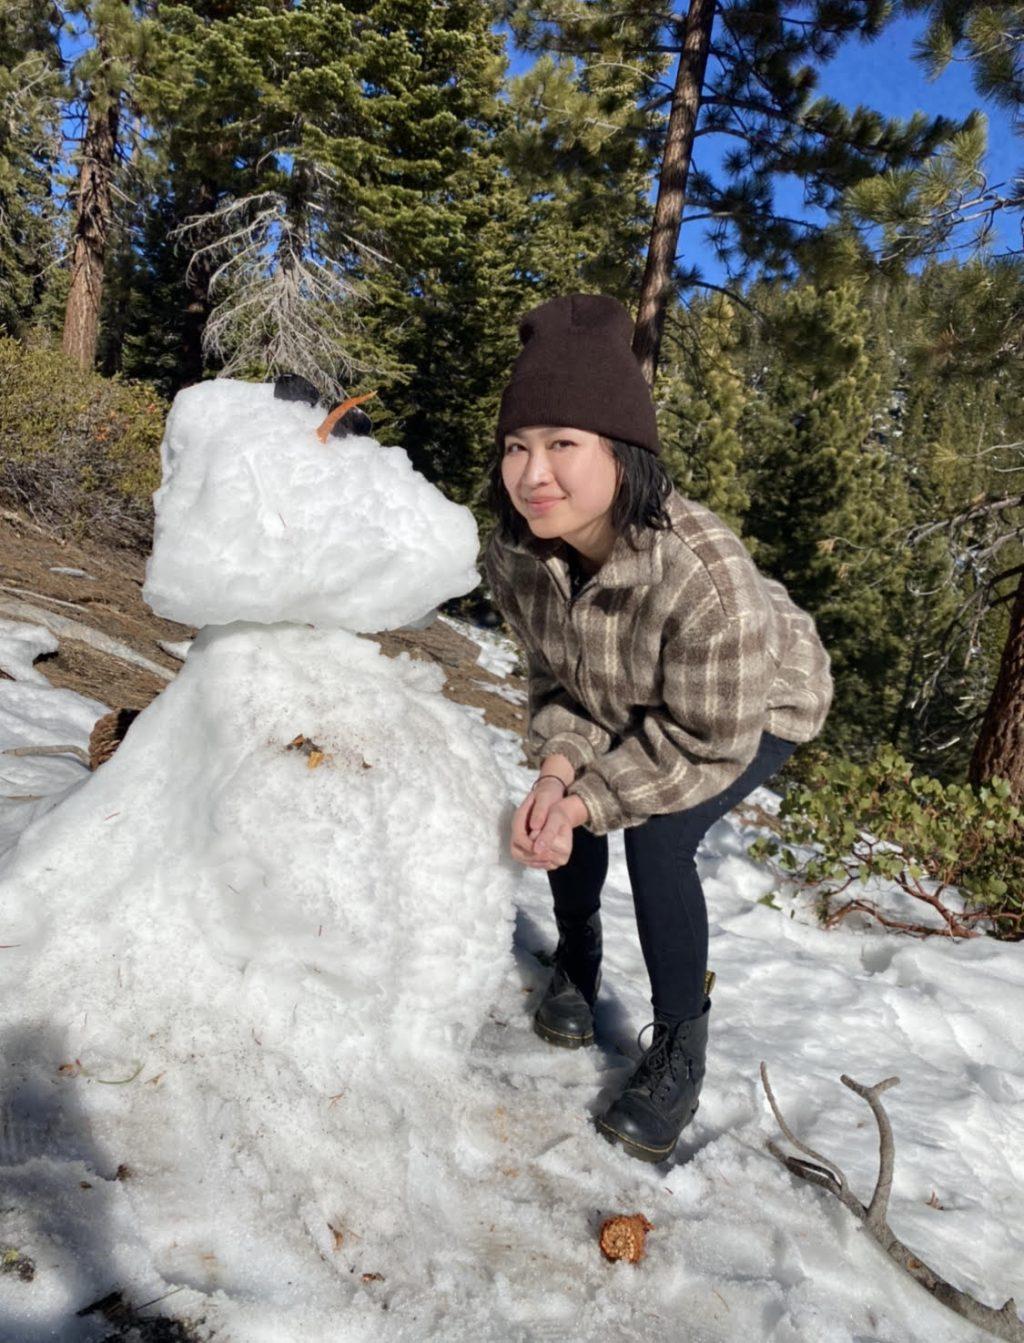 Chan poses with a snowman she found while hiking in Lake Tahoe, Calif., in January. Chan said she wanted to make the move from Northern California to Southern California for a chance to enjoy warmer weather.